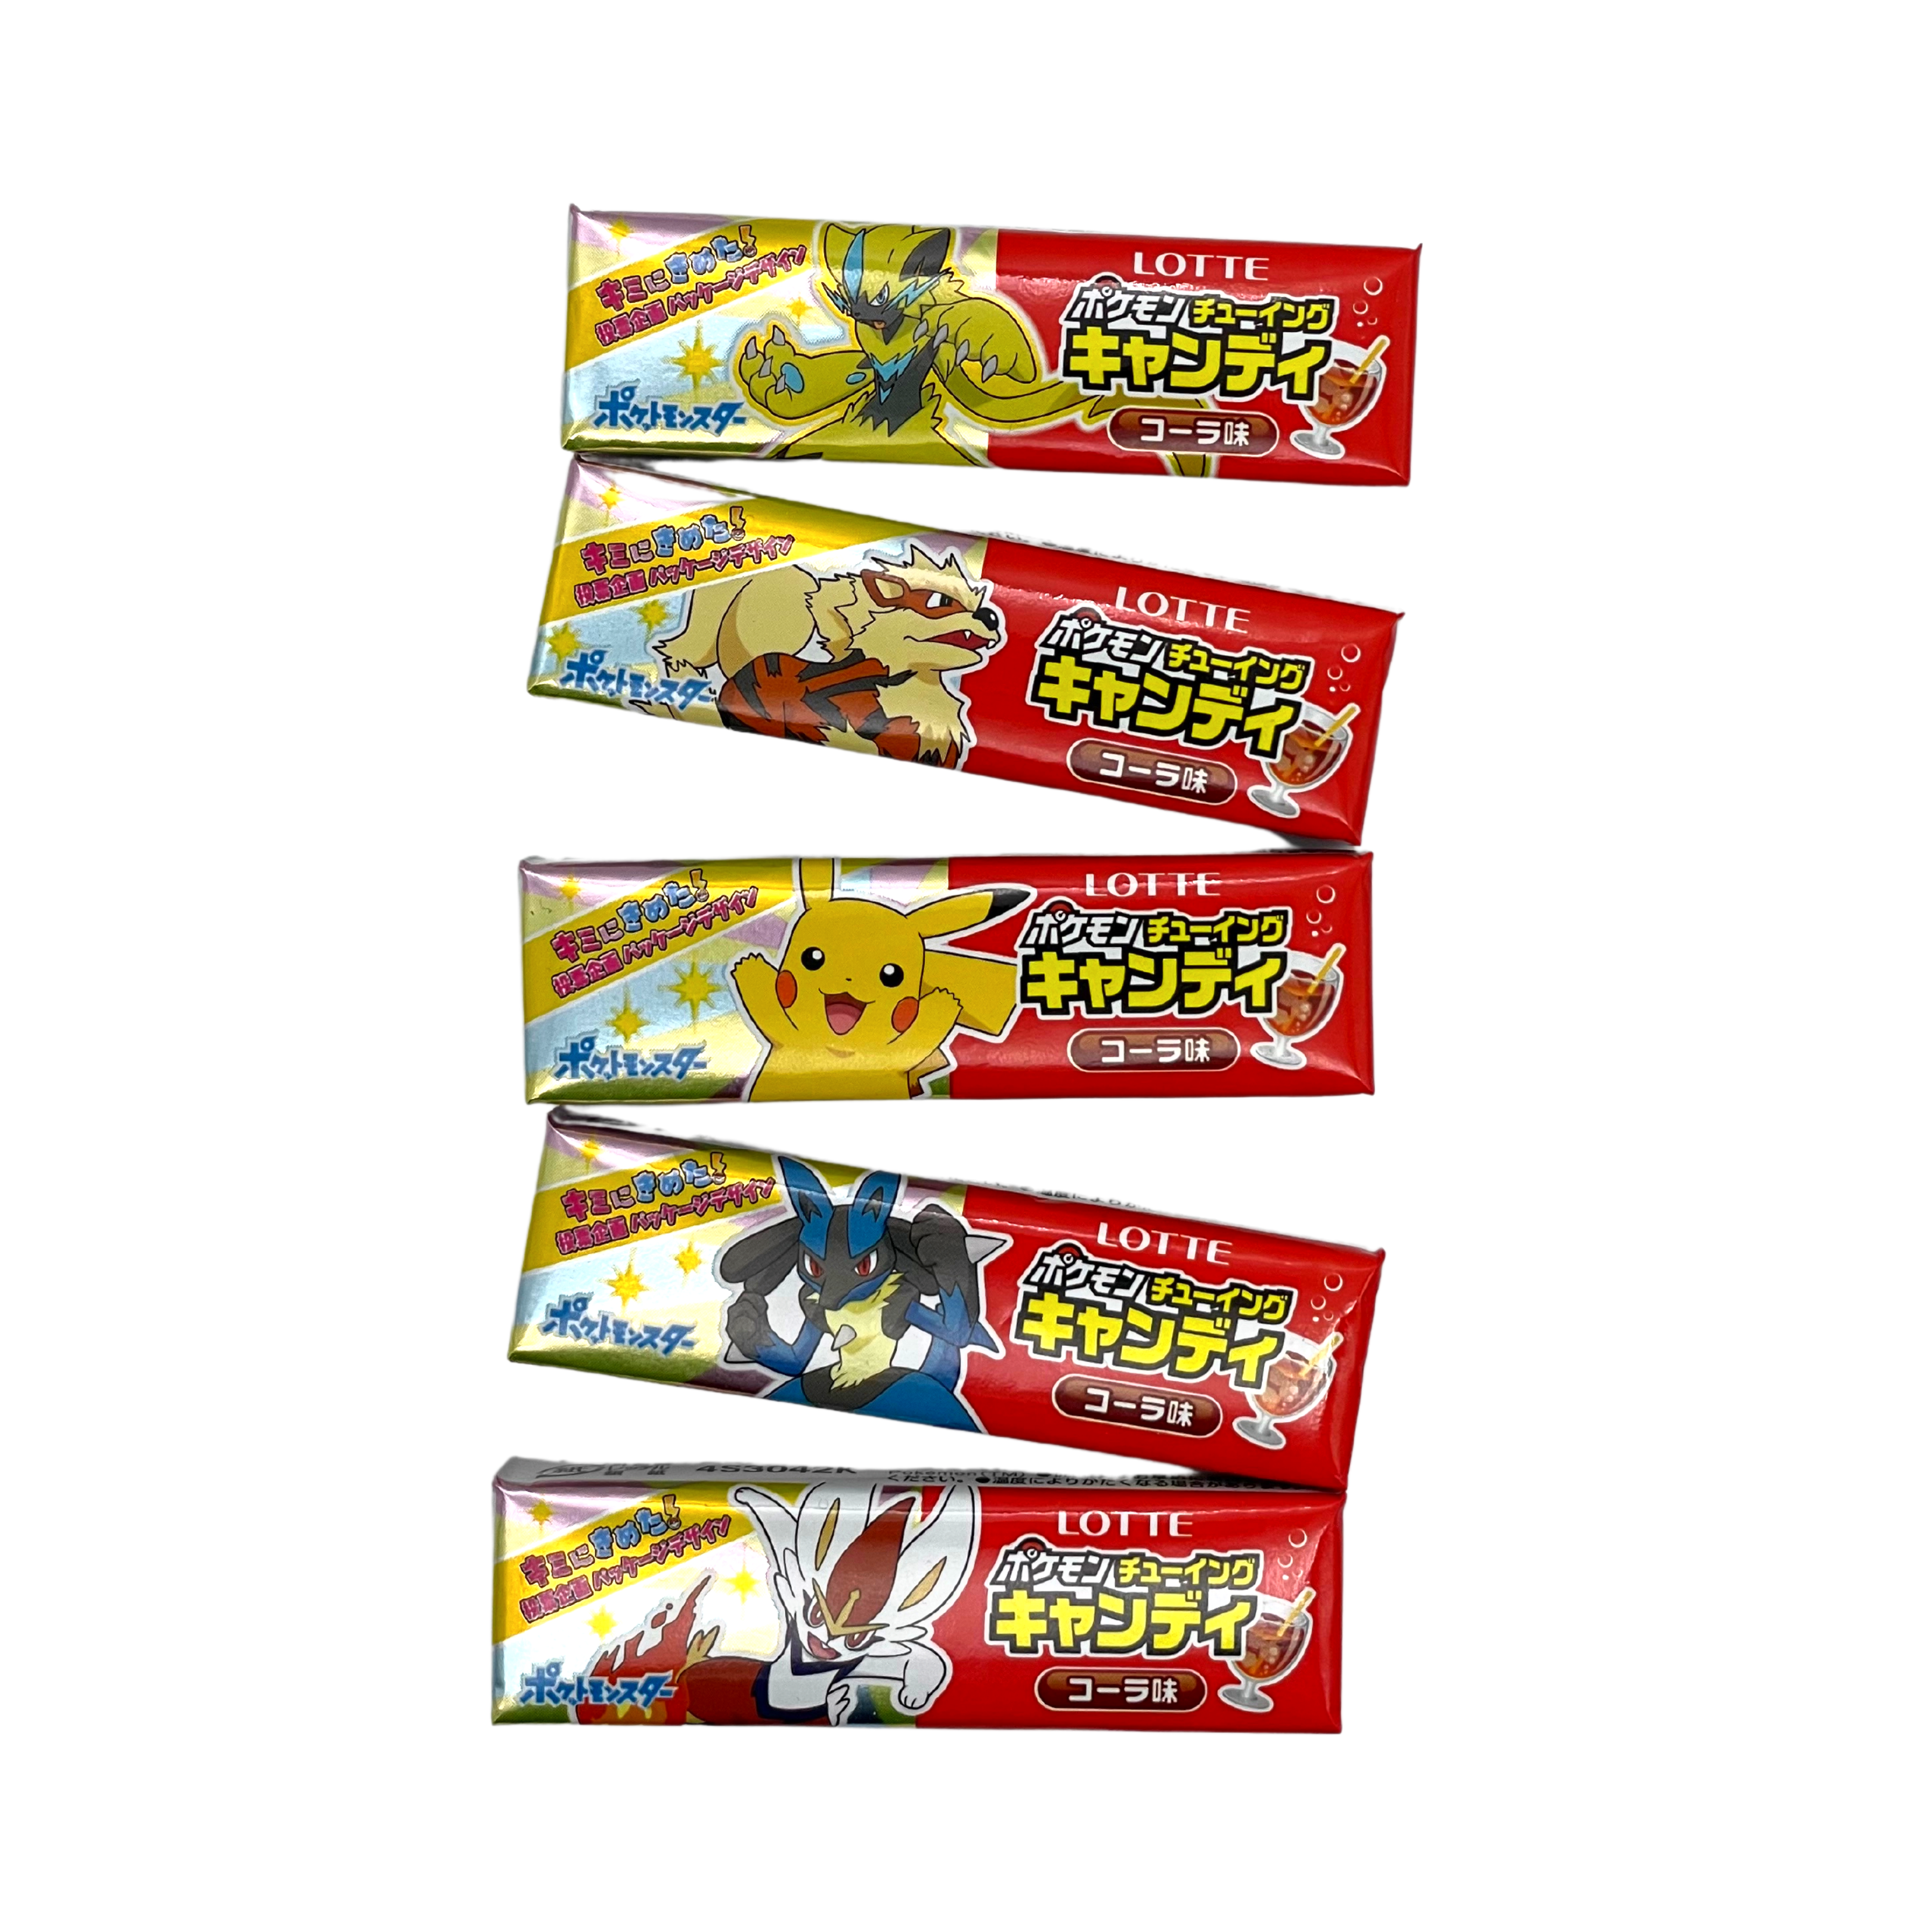 Lotte- Pokemon Chewing Candy JAPAN IMPORT